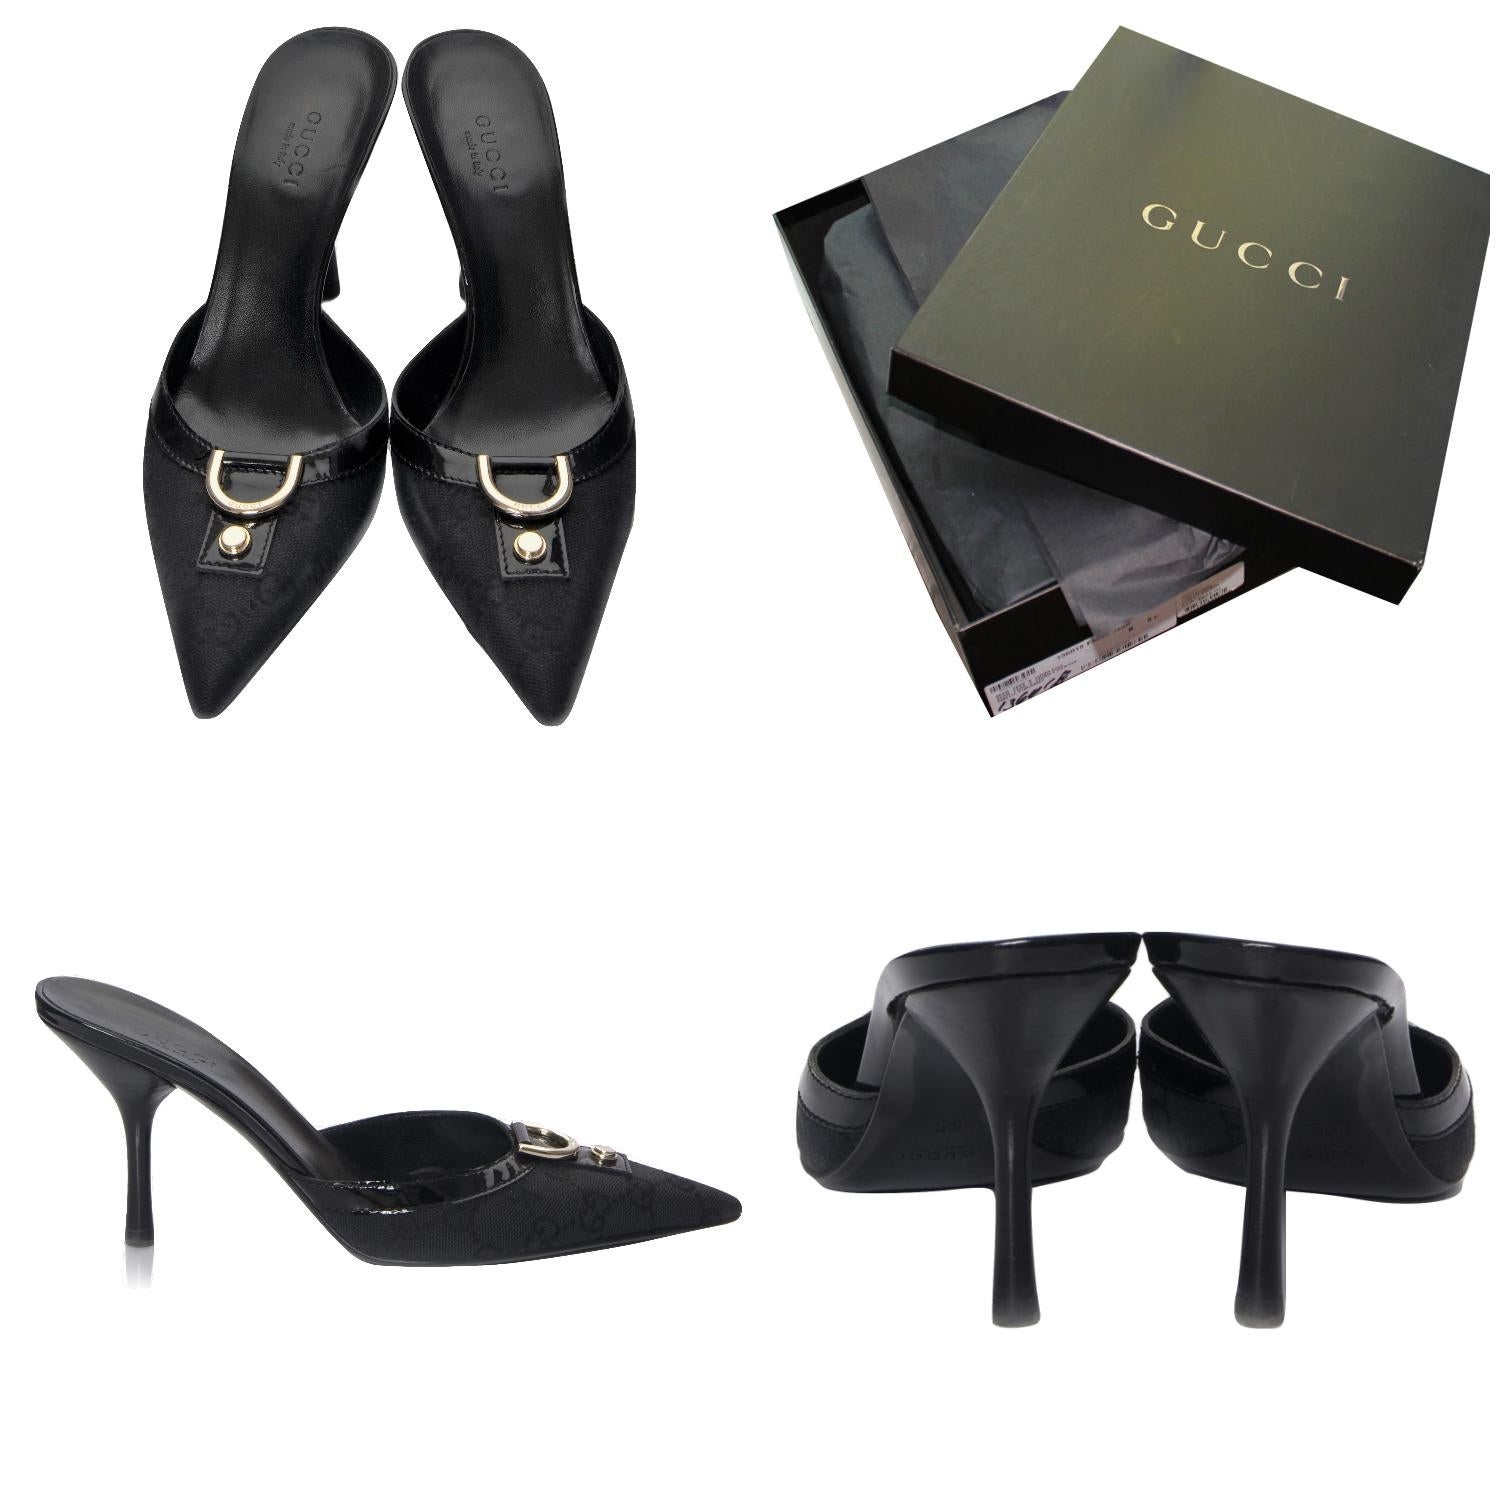 Tom Ford for Gucci Mules 

Worn Twice Uppers are Perfect
* Stunning Black GG Canvas 
* Size: 6
* Black Patent Accent
* Gold Gucci Hardware 
* Leather Footbed
* Kitten Mule
* 3.5